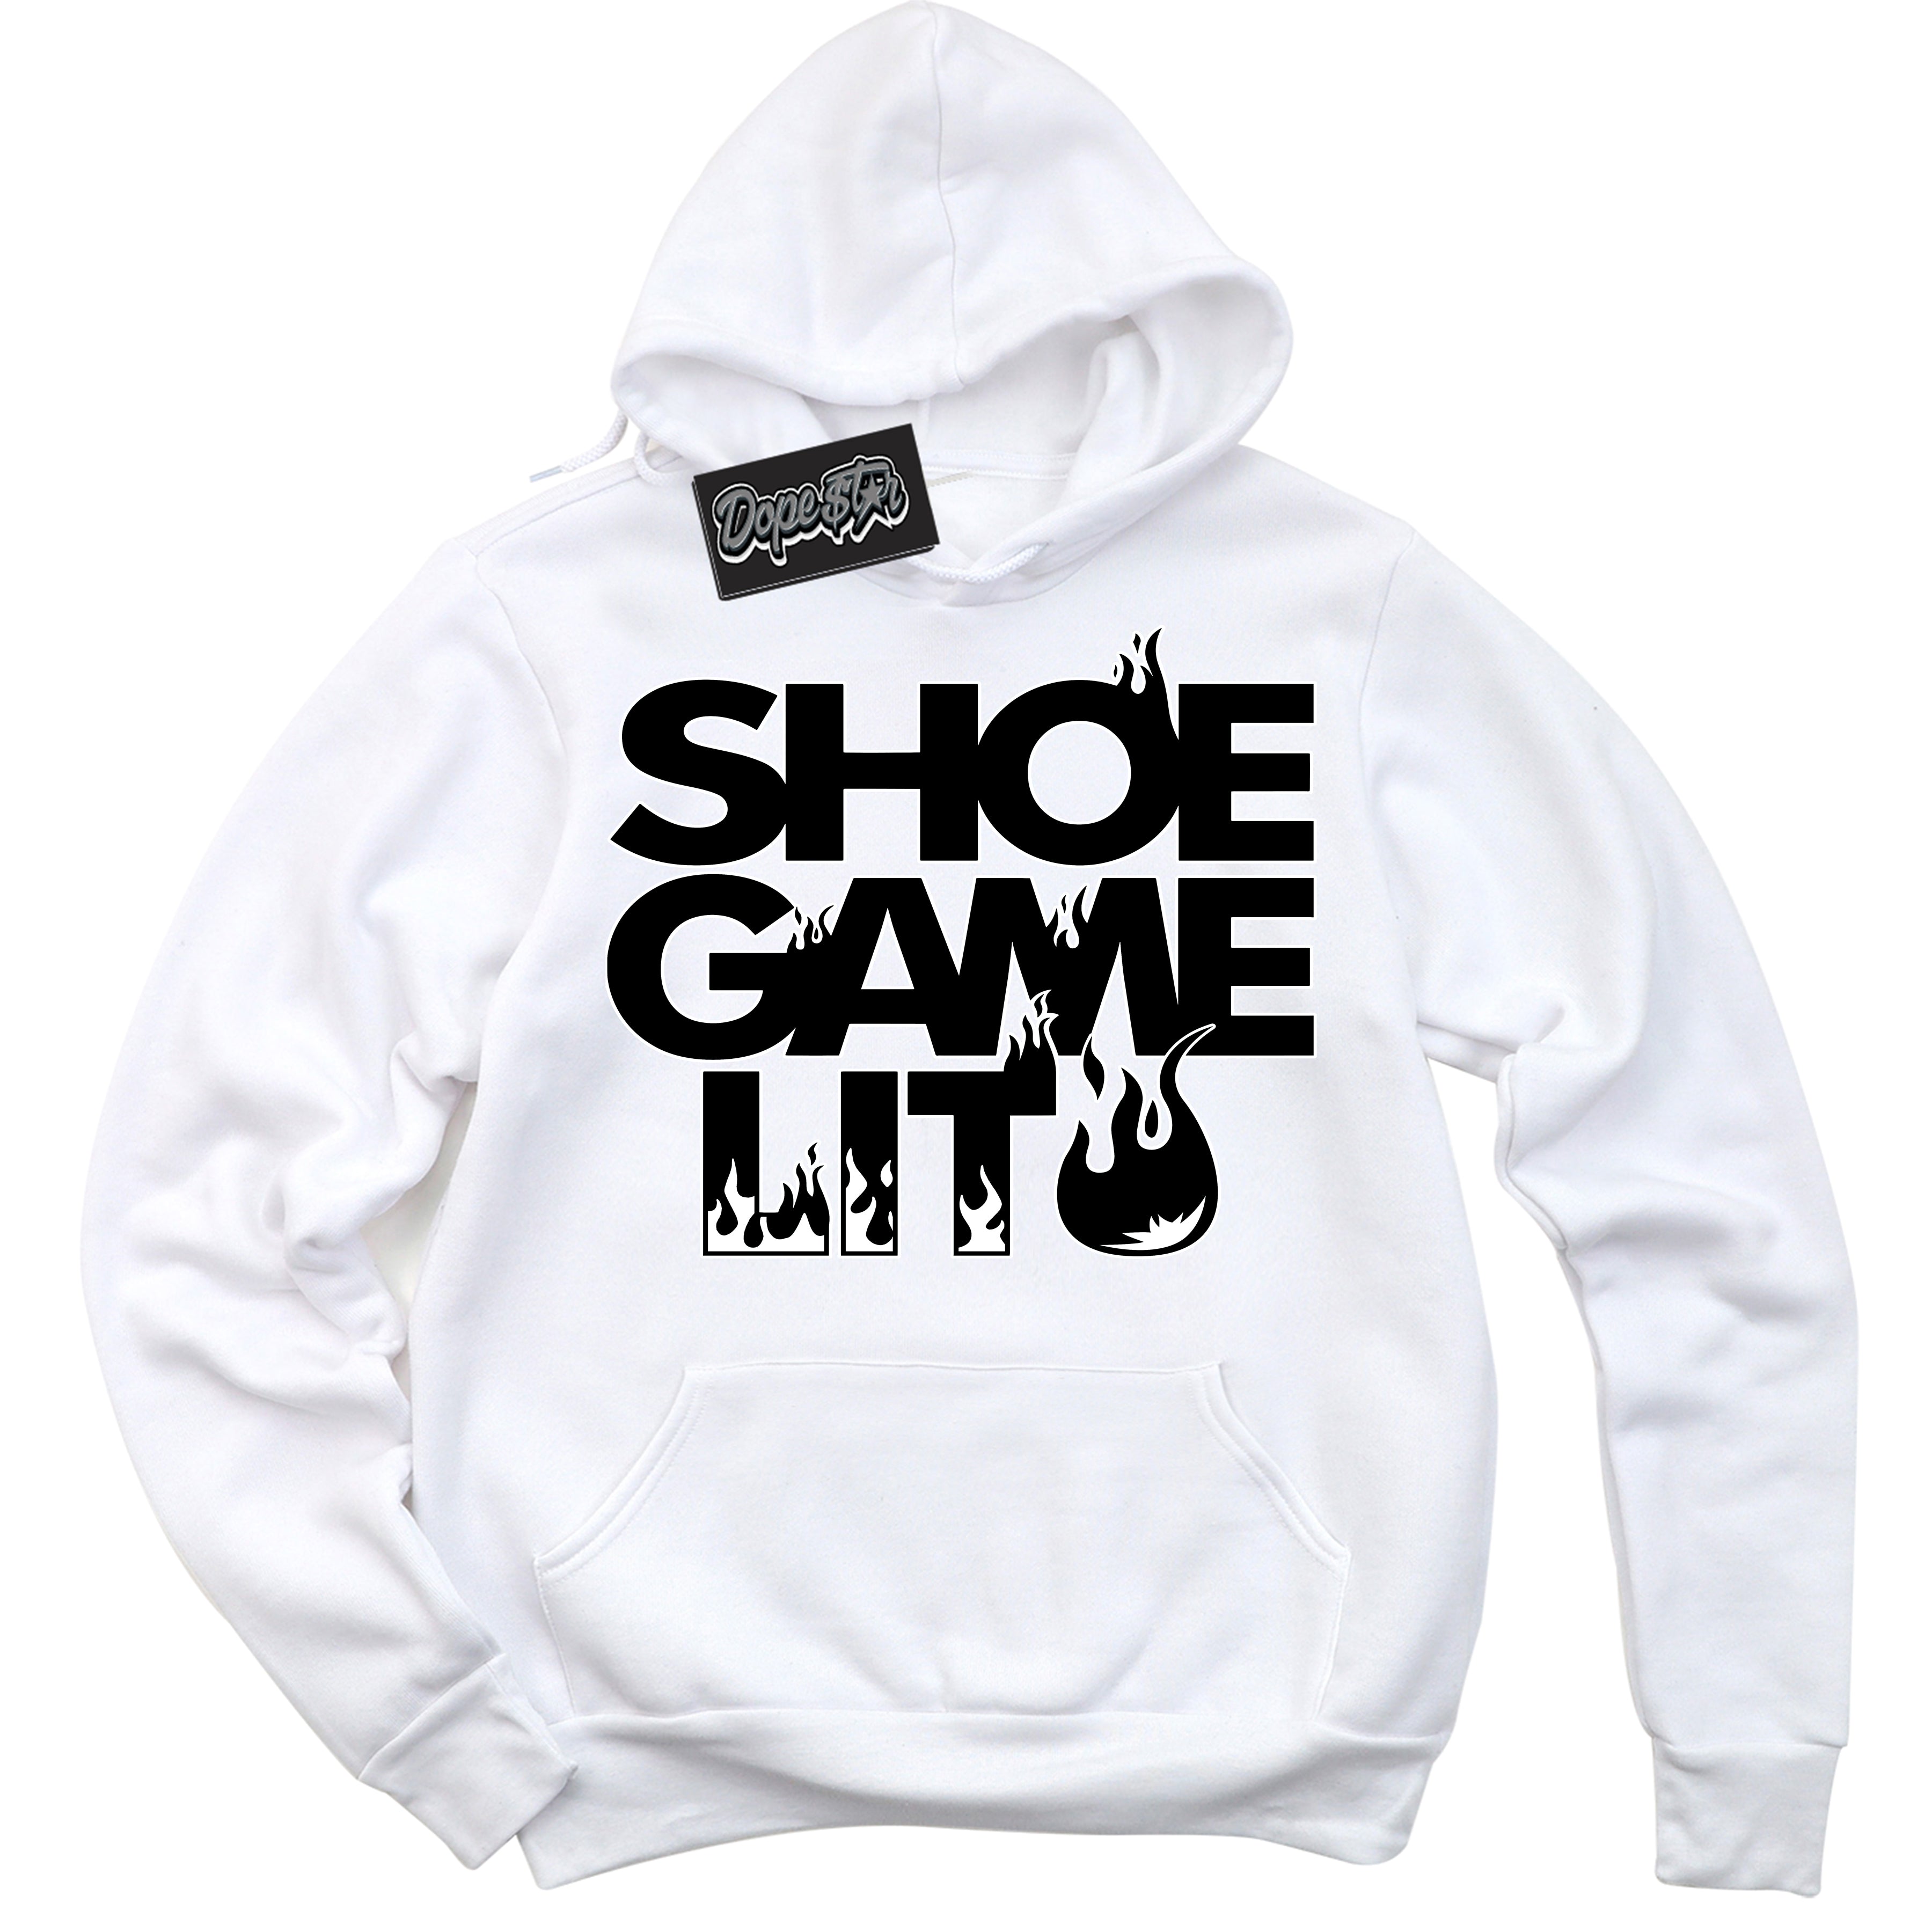 Cool White Hoodie with “ Shoe Game Lit '' design that Perfectly Matches  '85 Black White 1s Sneakers.